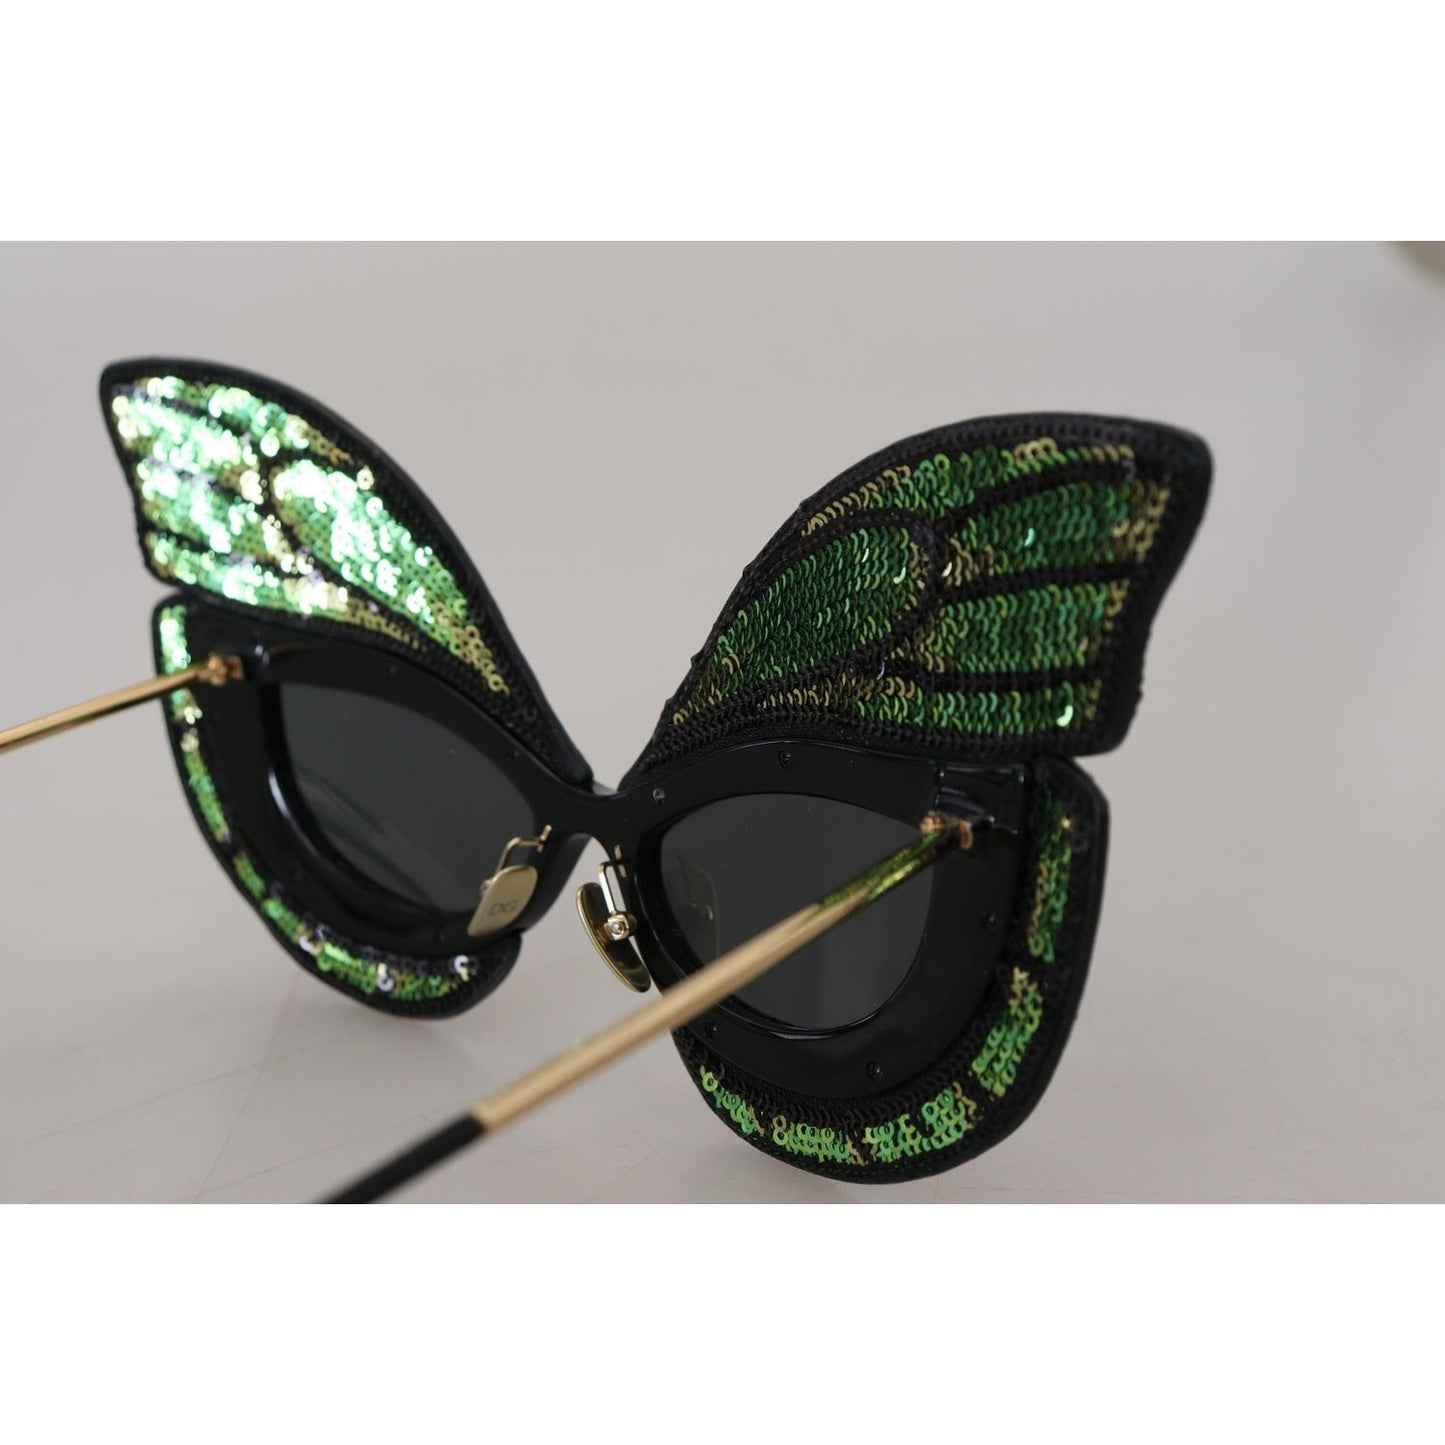 Dolce & Gabbana Exquisite Sequined Butterfly Sunglasses exquisite-sequined-butterfly-sunglasses